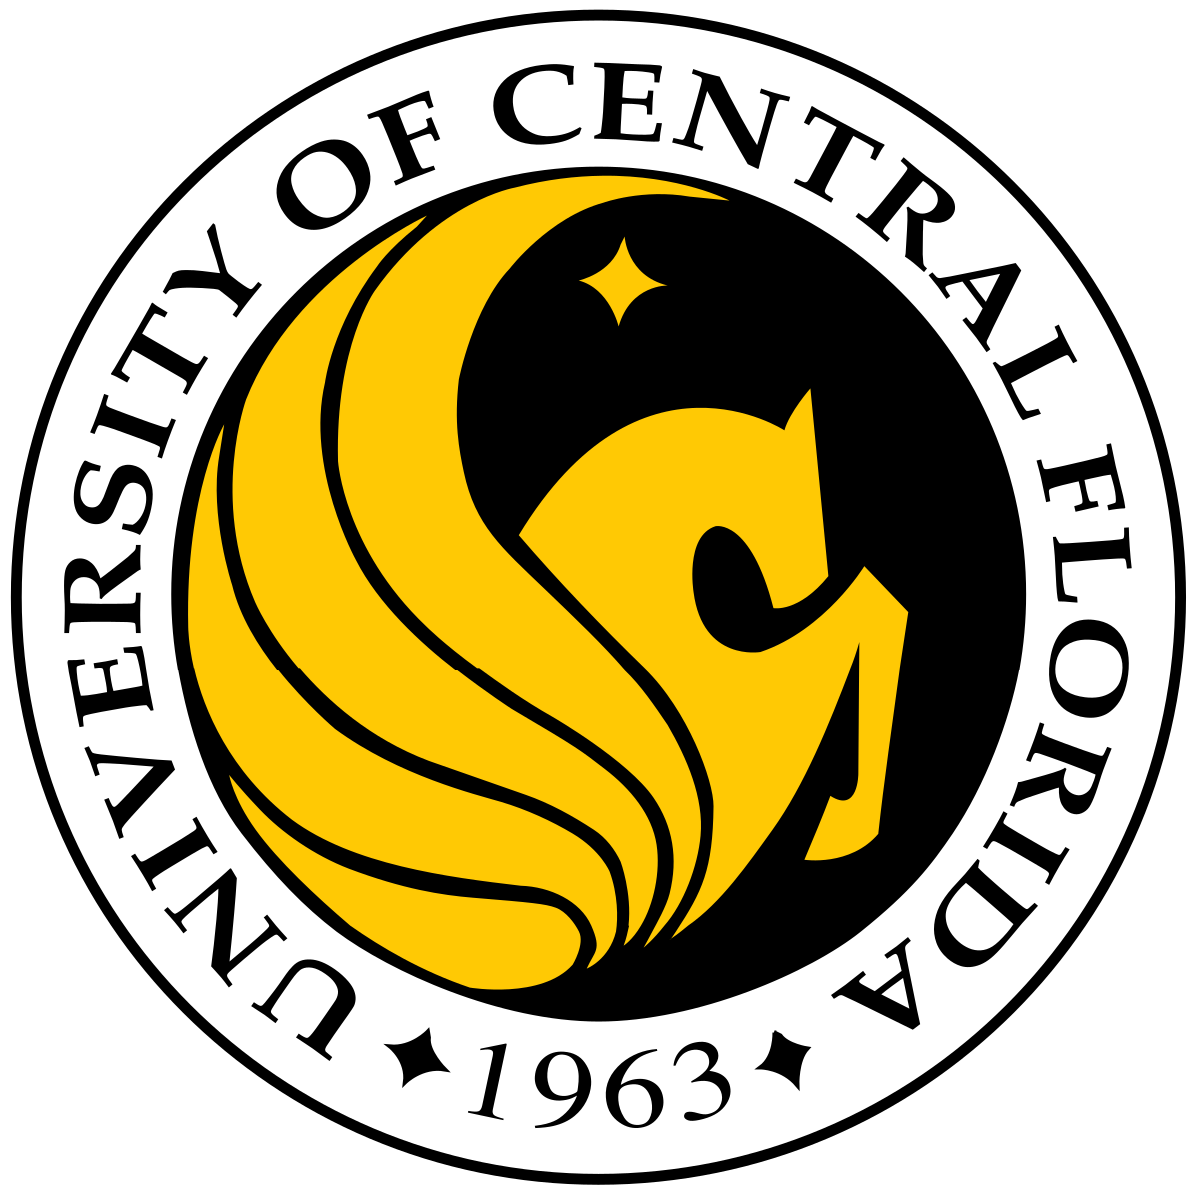 1200px-University_of_Central_Florida_seal.svg.png